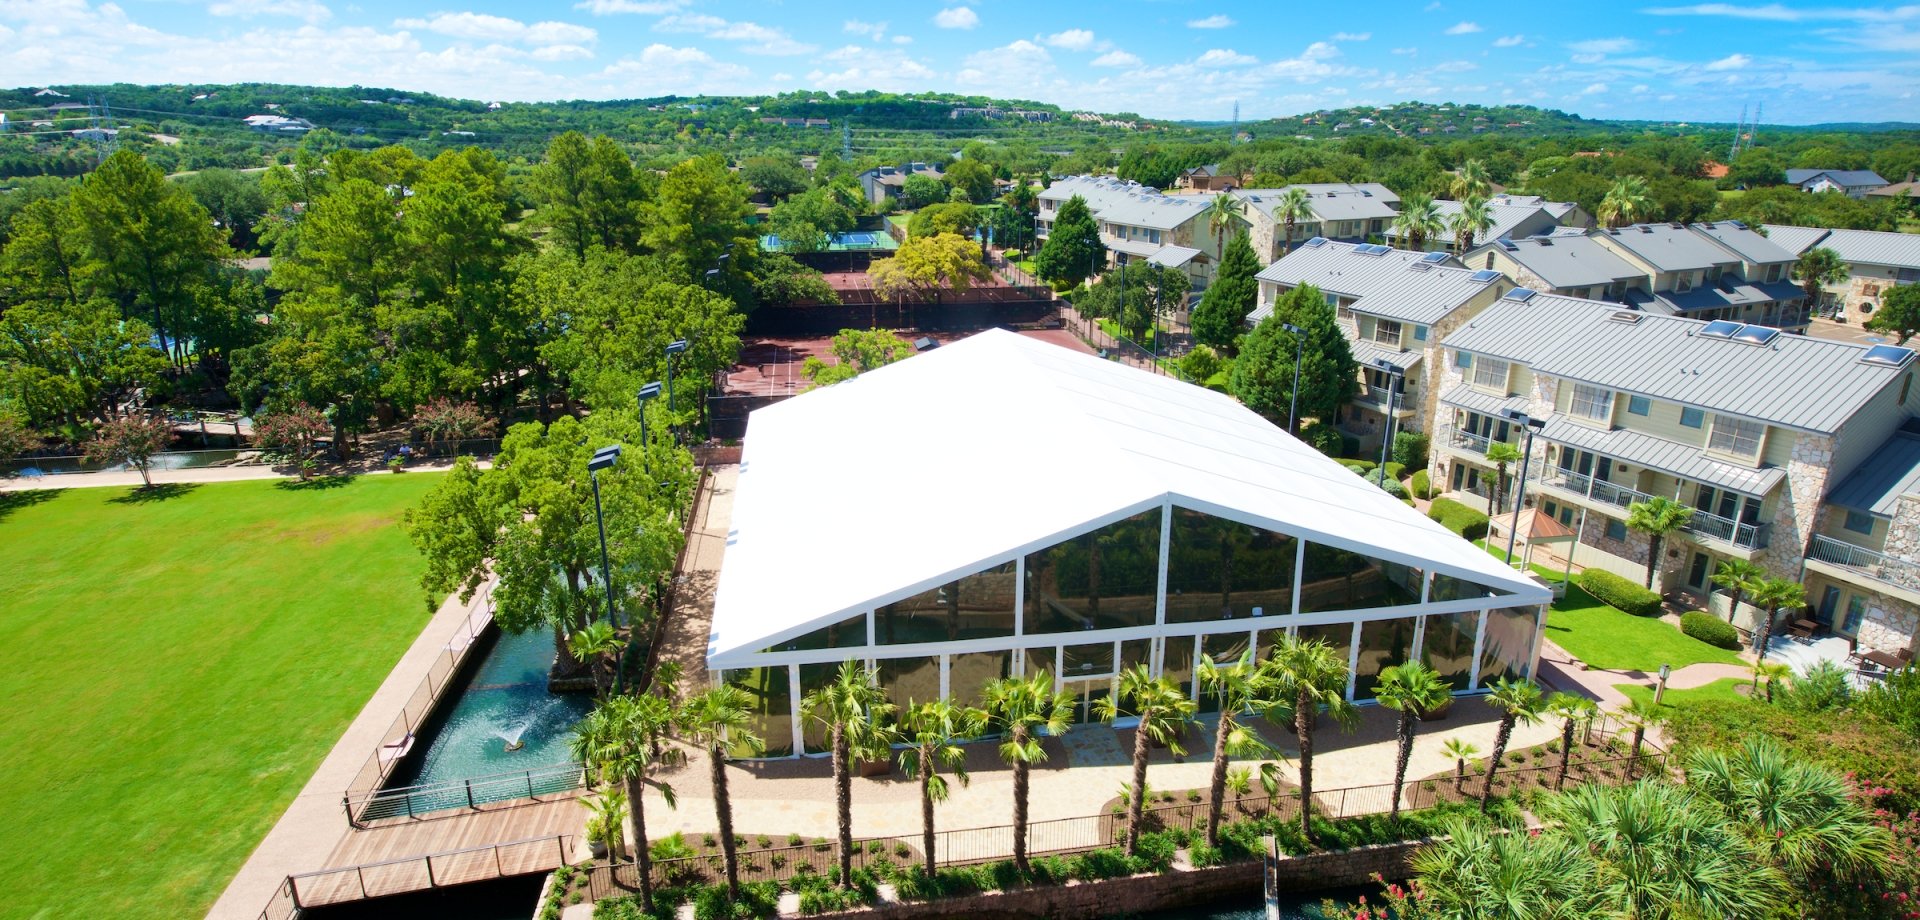 large pavilion space to hold events and parties in the Texas Hill Country.